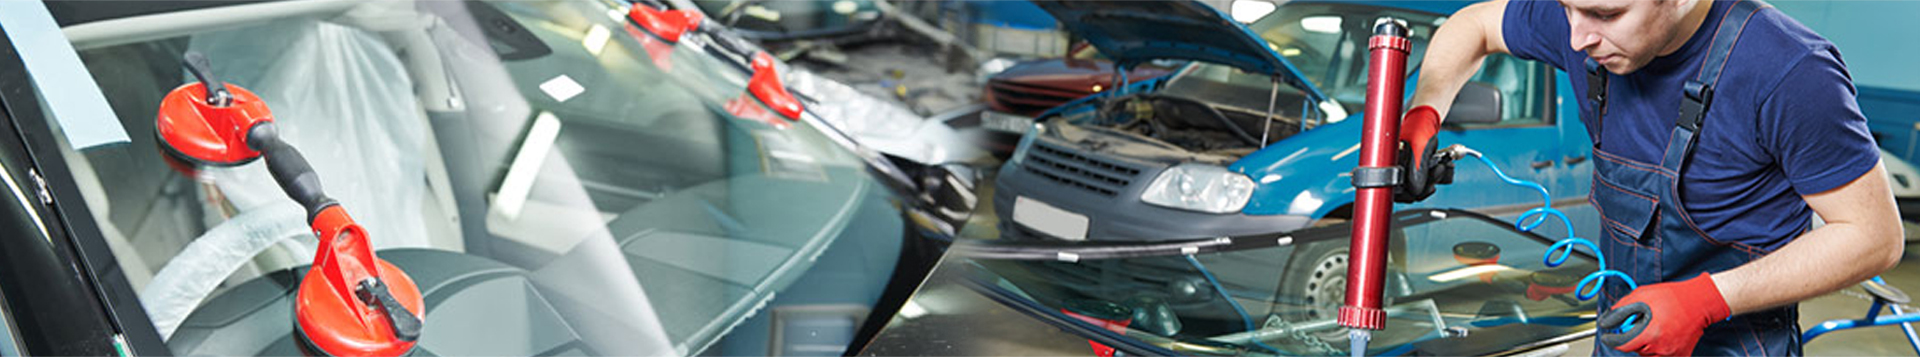 LG Auto glass specialist doing repairing services